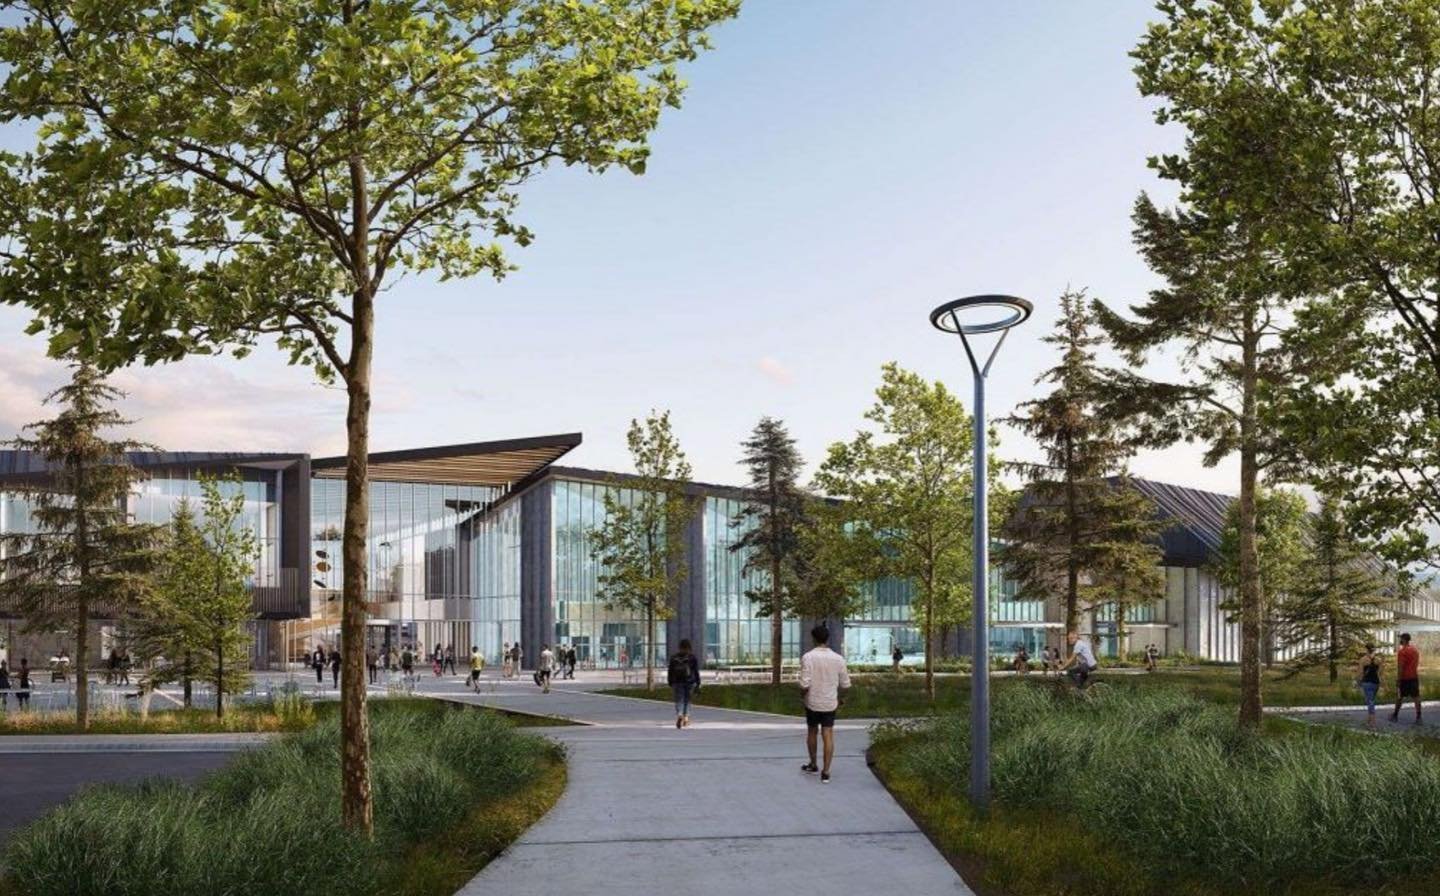 We are honoured to be attending the opening celebration for the təməsew̓txʷ Aquatic and Community Centre in New Westminster this evening. This impressive 10,644 m2 facility has been designed to be the first aquatic facility in Canada to achieve the C